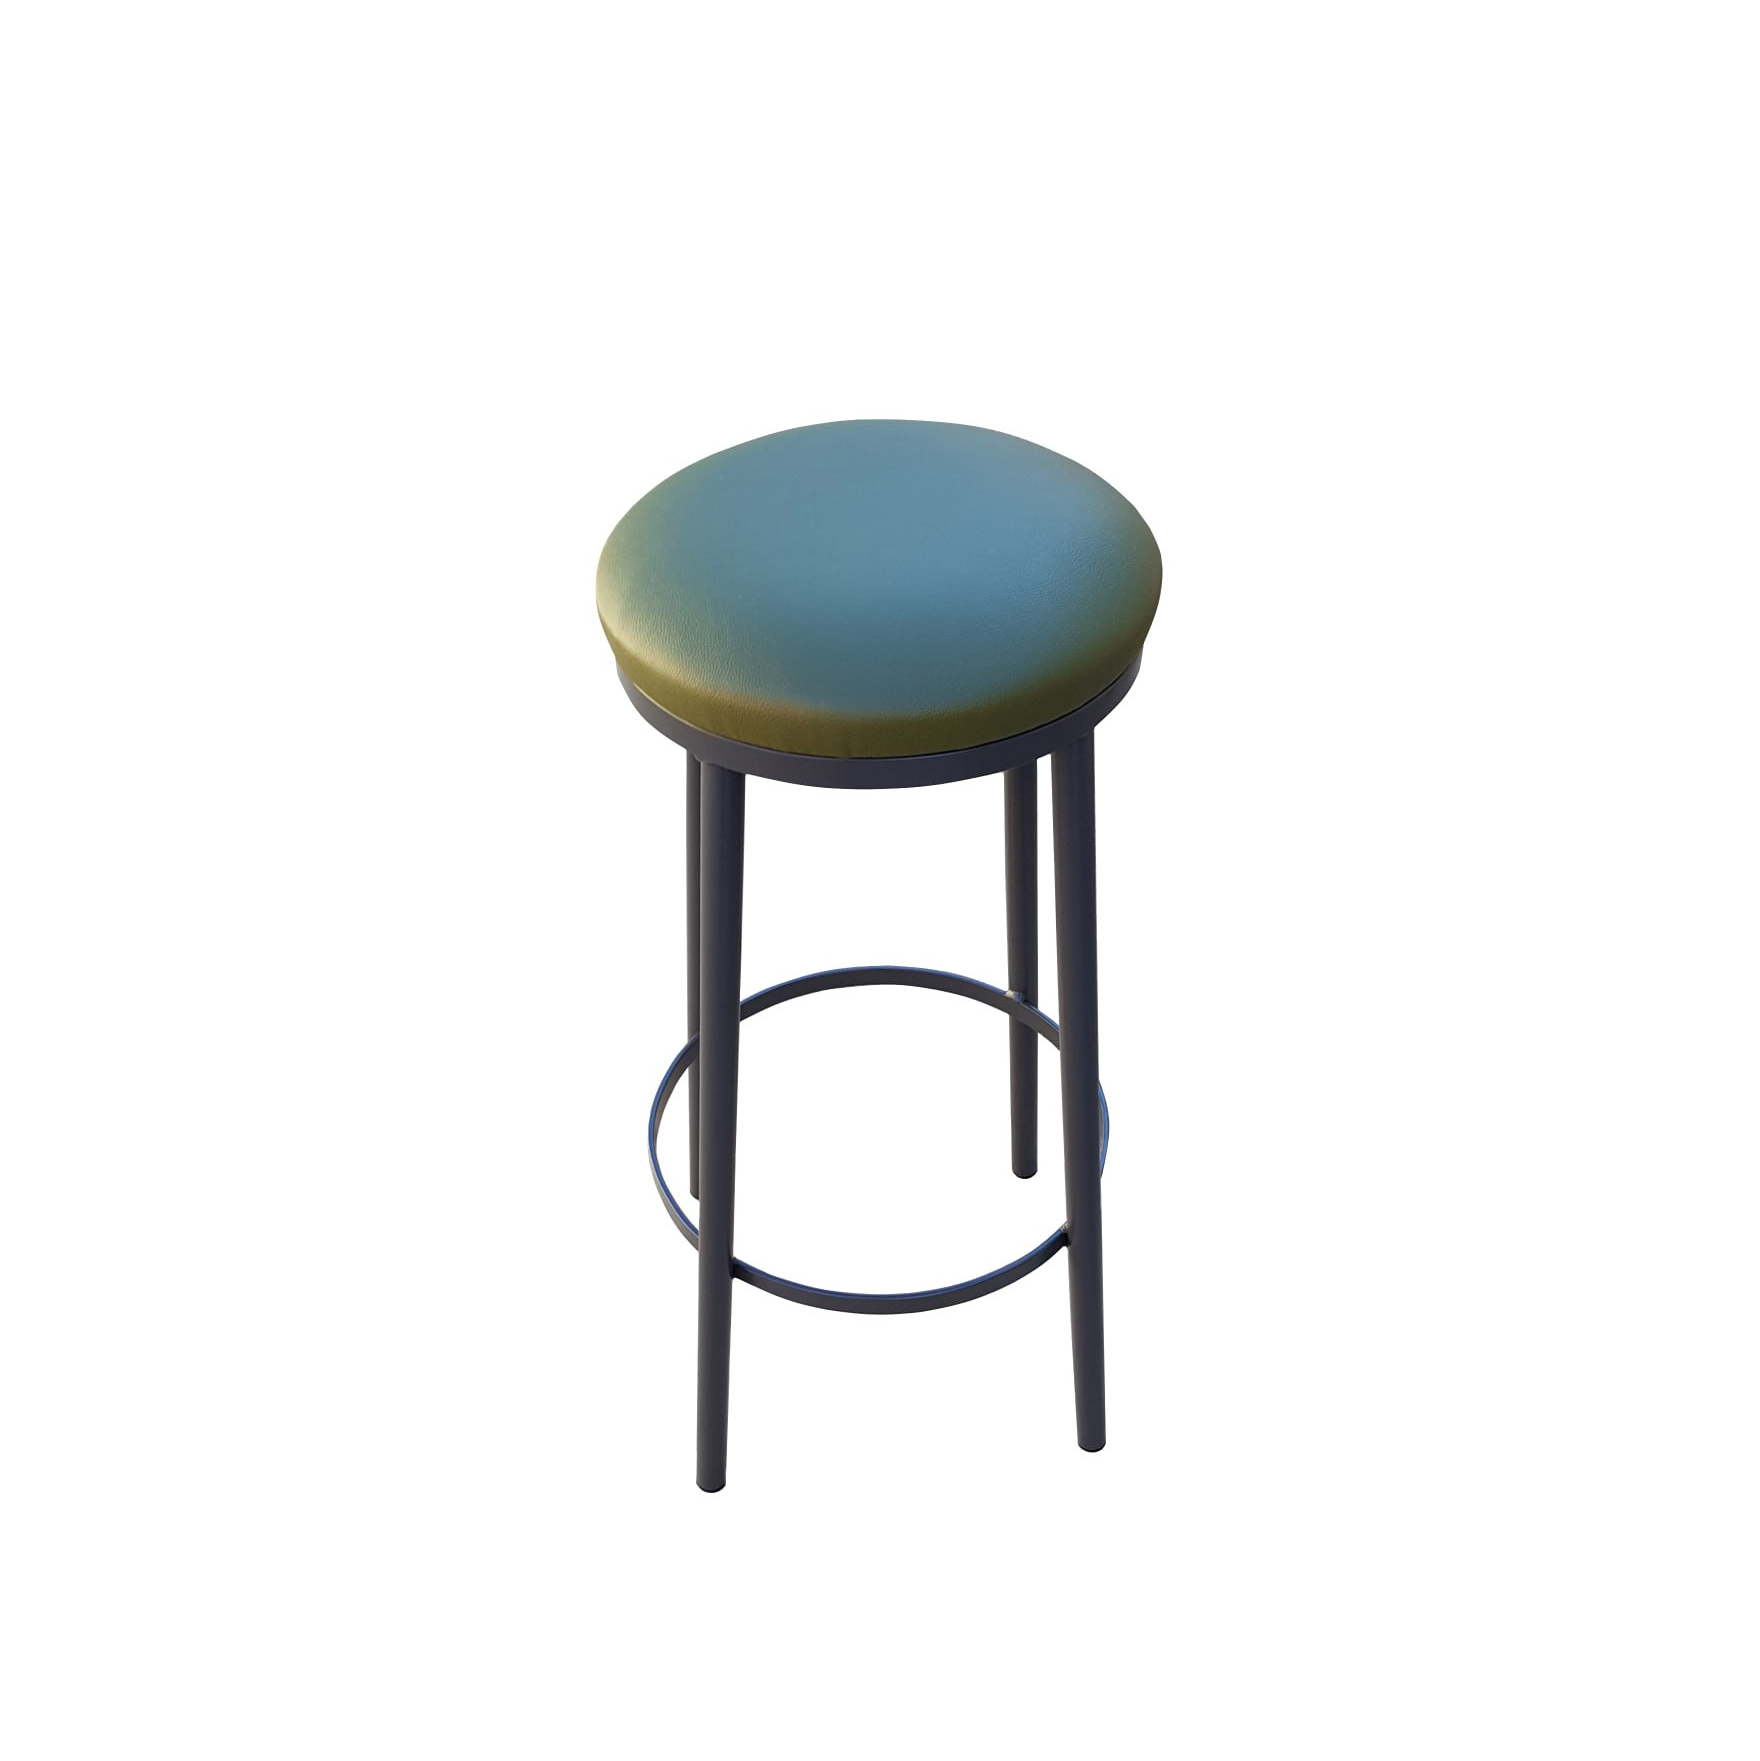 Deck Round Stool Powder Coated with Vinyl Green Upholstery and Foot Support